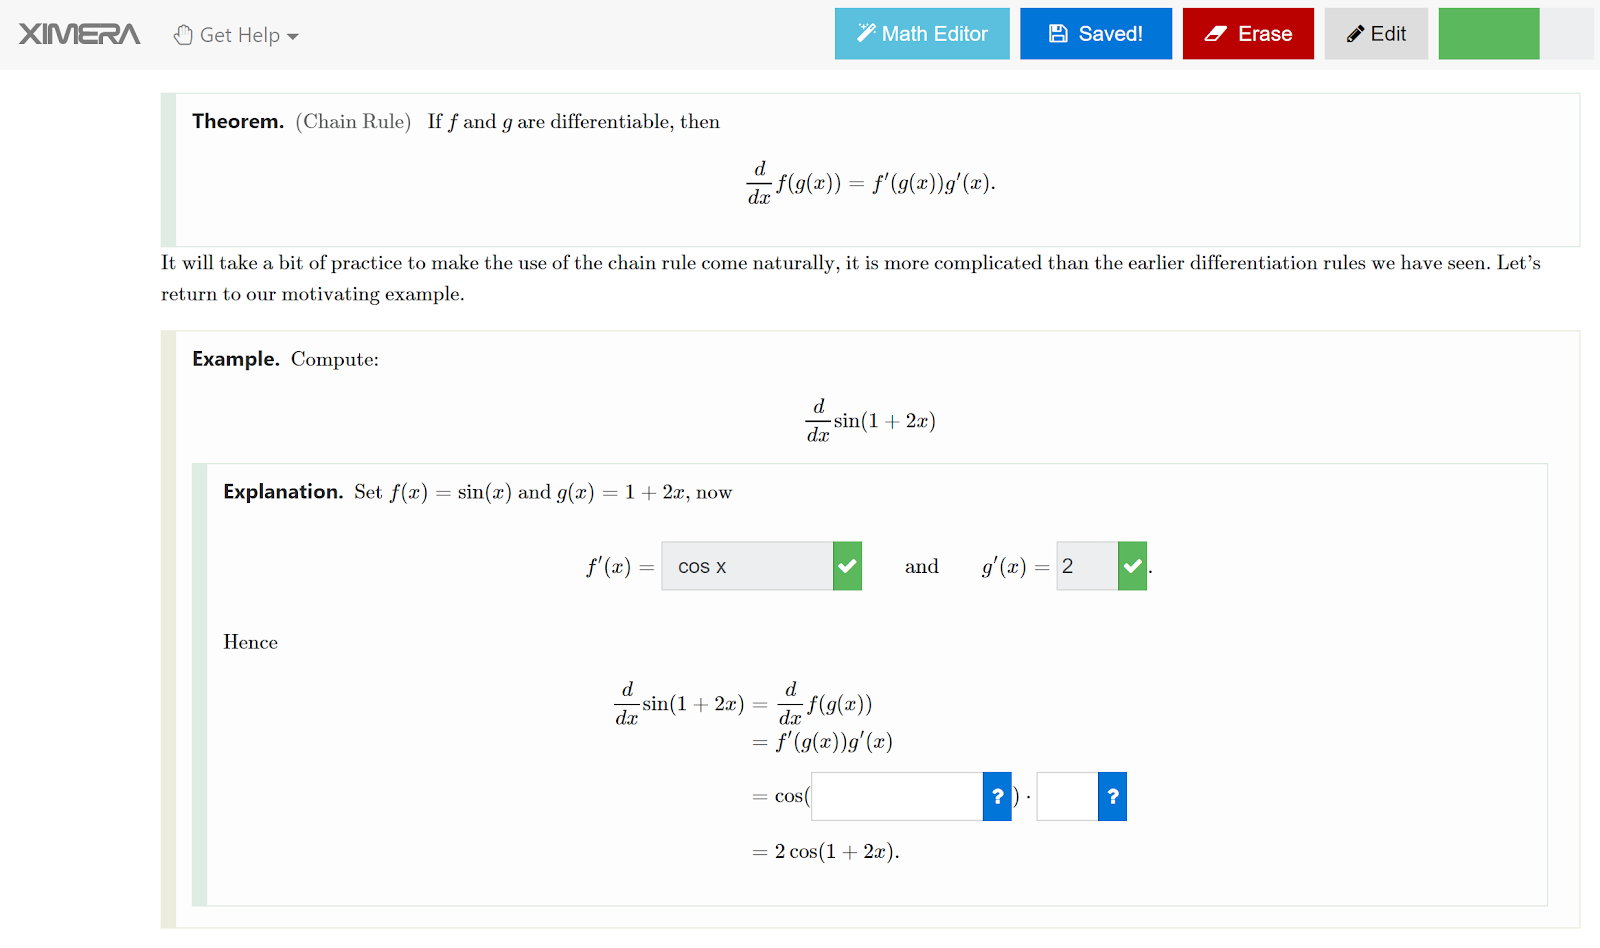 XIMERA screenshot with theorem and worked example with fill in the blank question